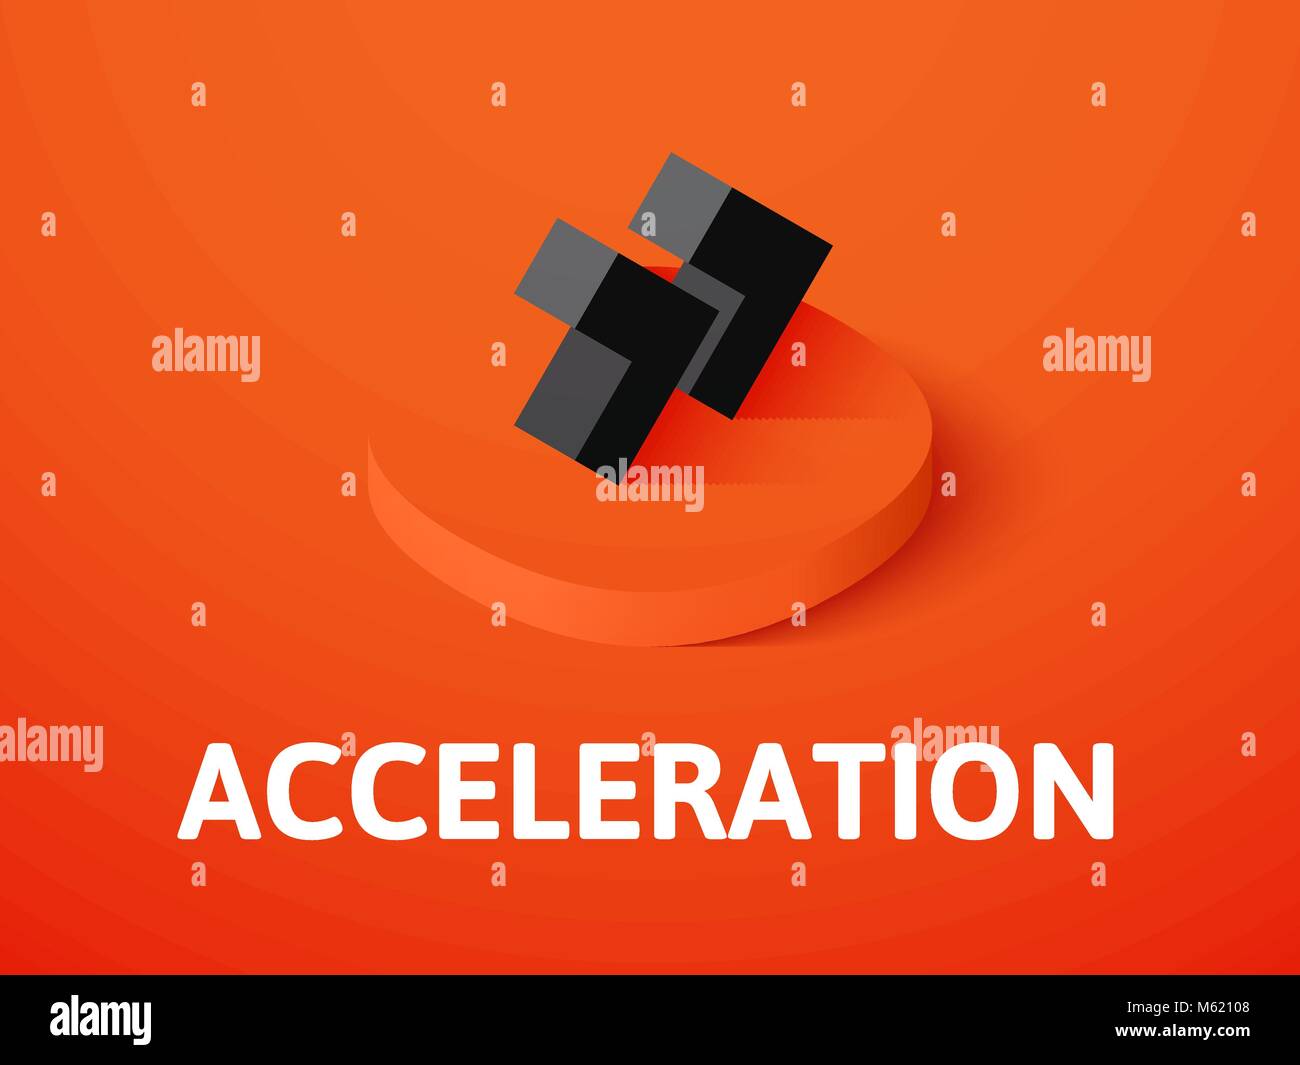 Acceleration isometric icon, isolated on color background Stock Vector